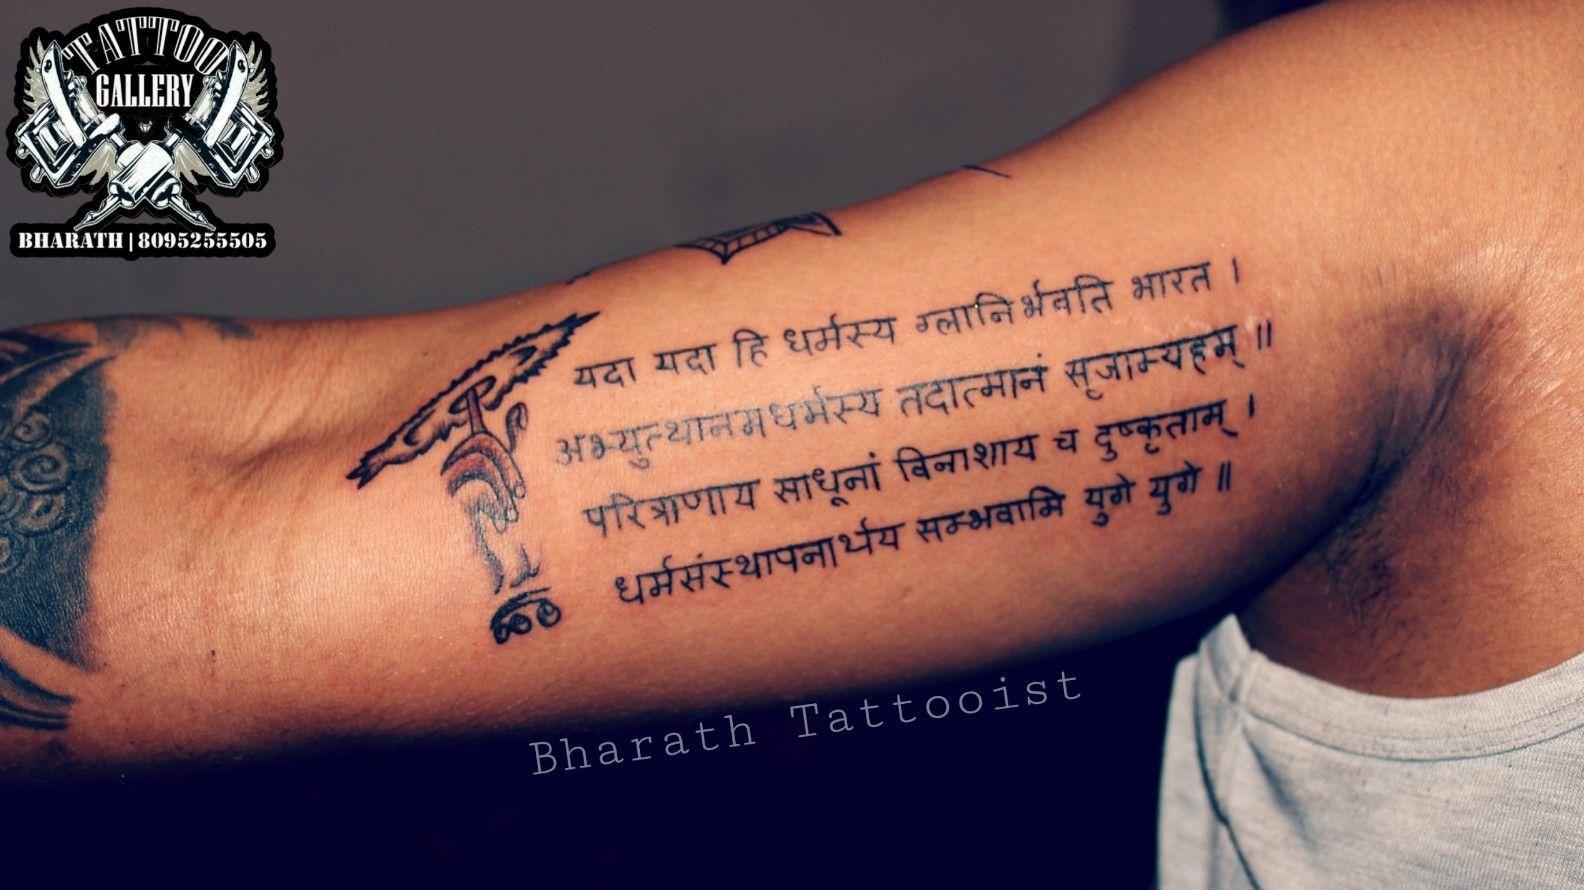 What Sanskrit shlokas and texts can you suggest for my first tattoo? - Quora